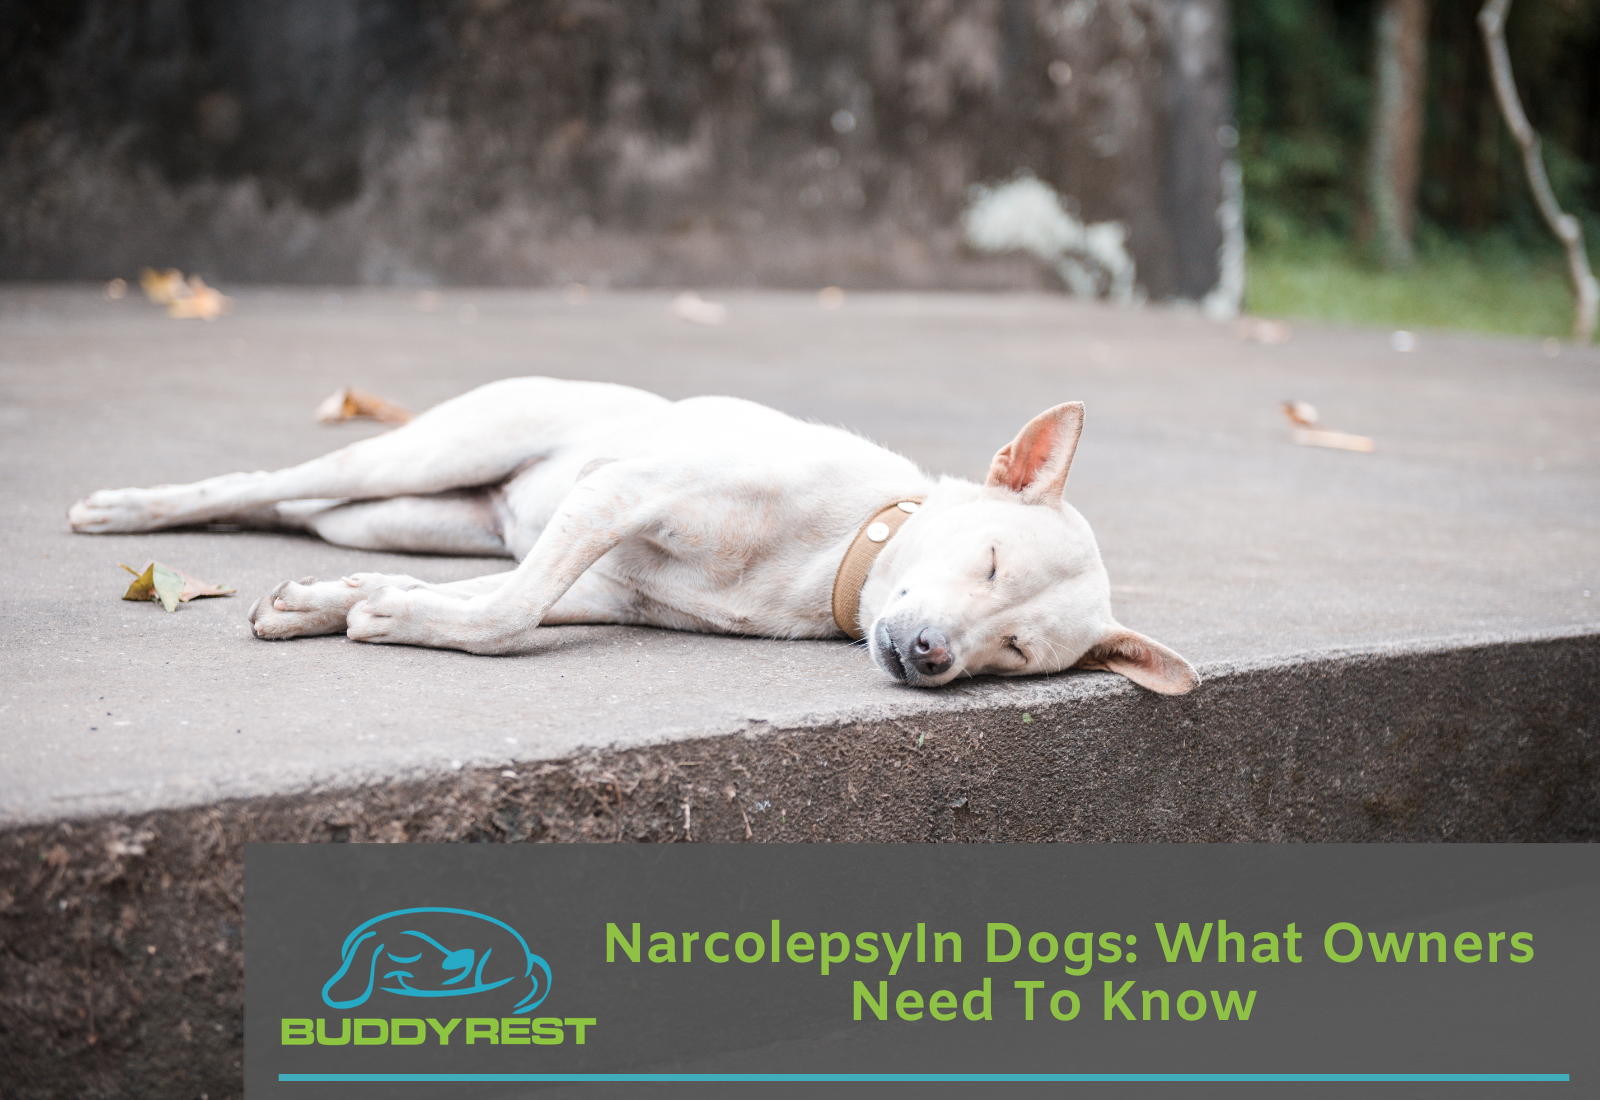 Narcolepsy in Dogs: What Owners Need To Know